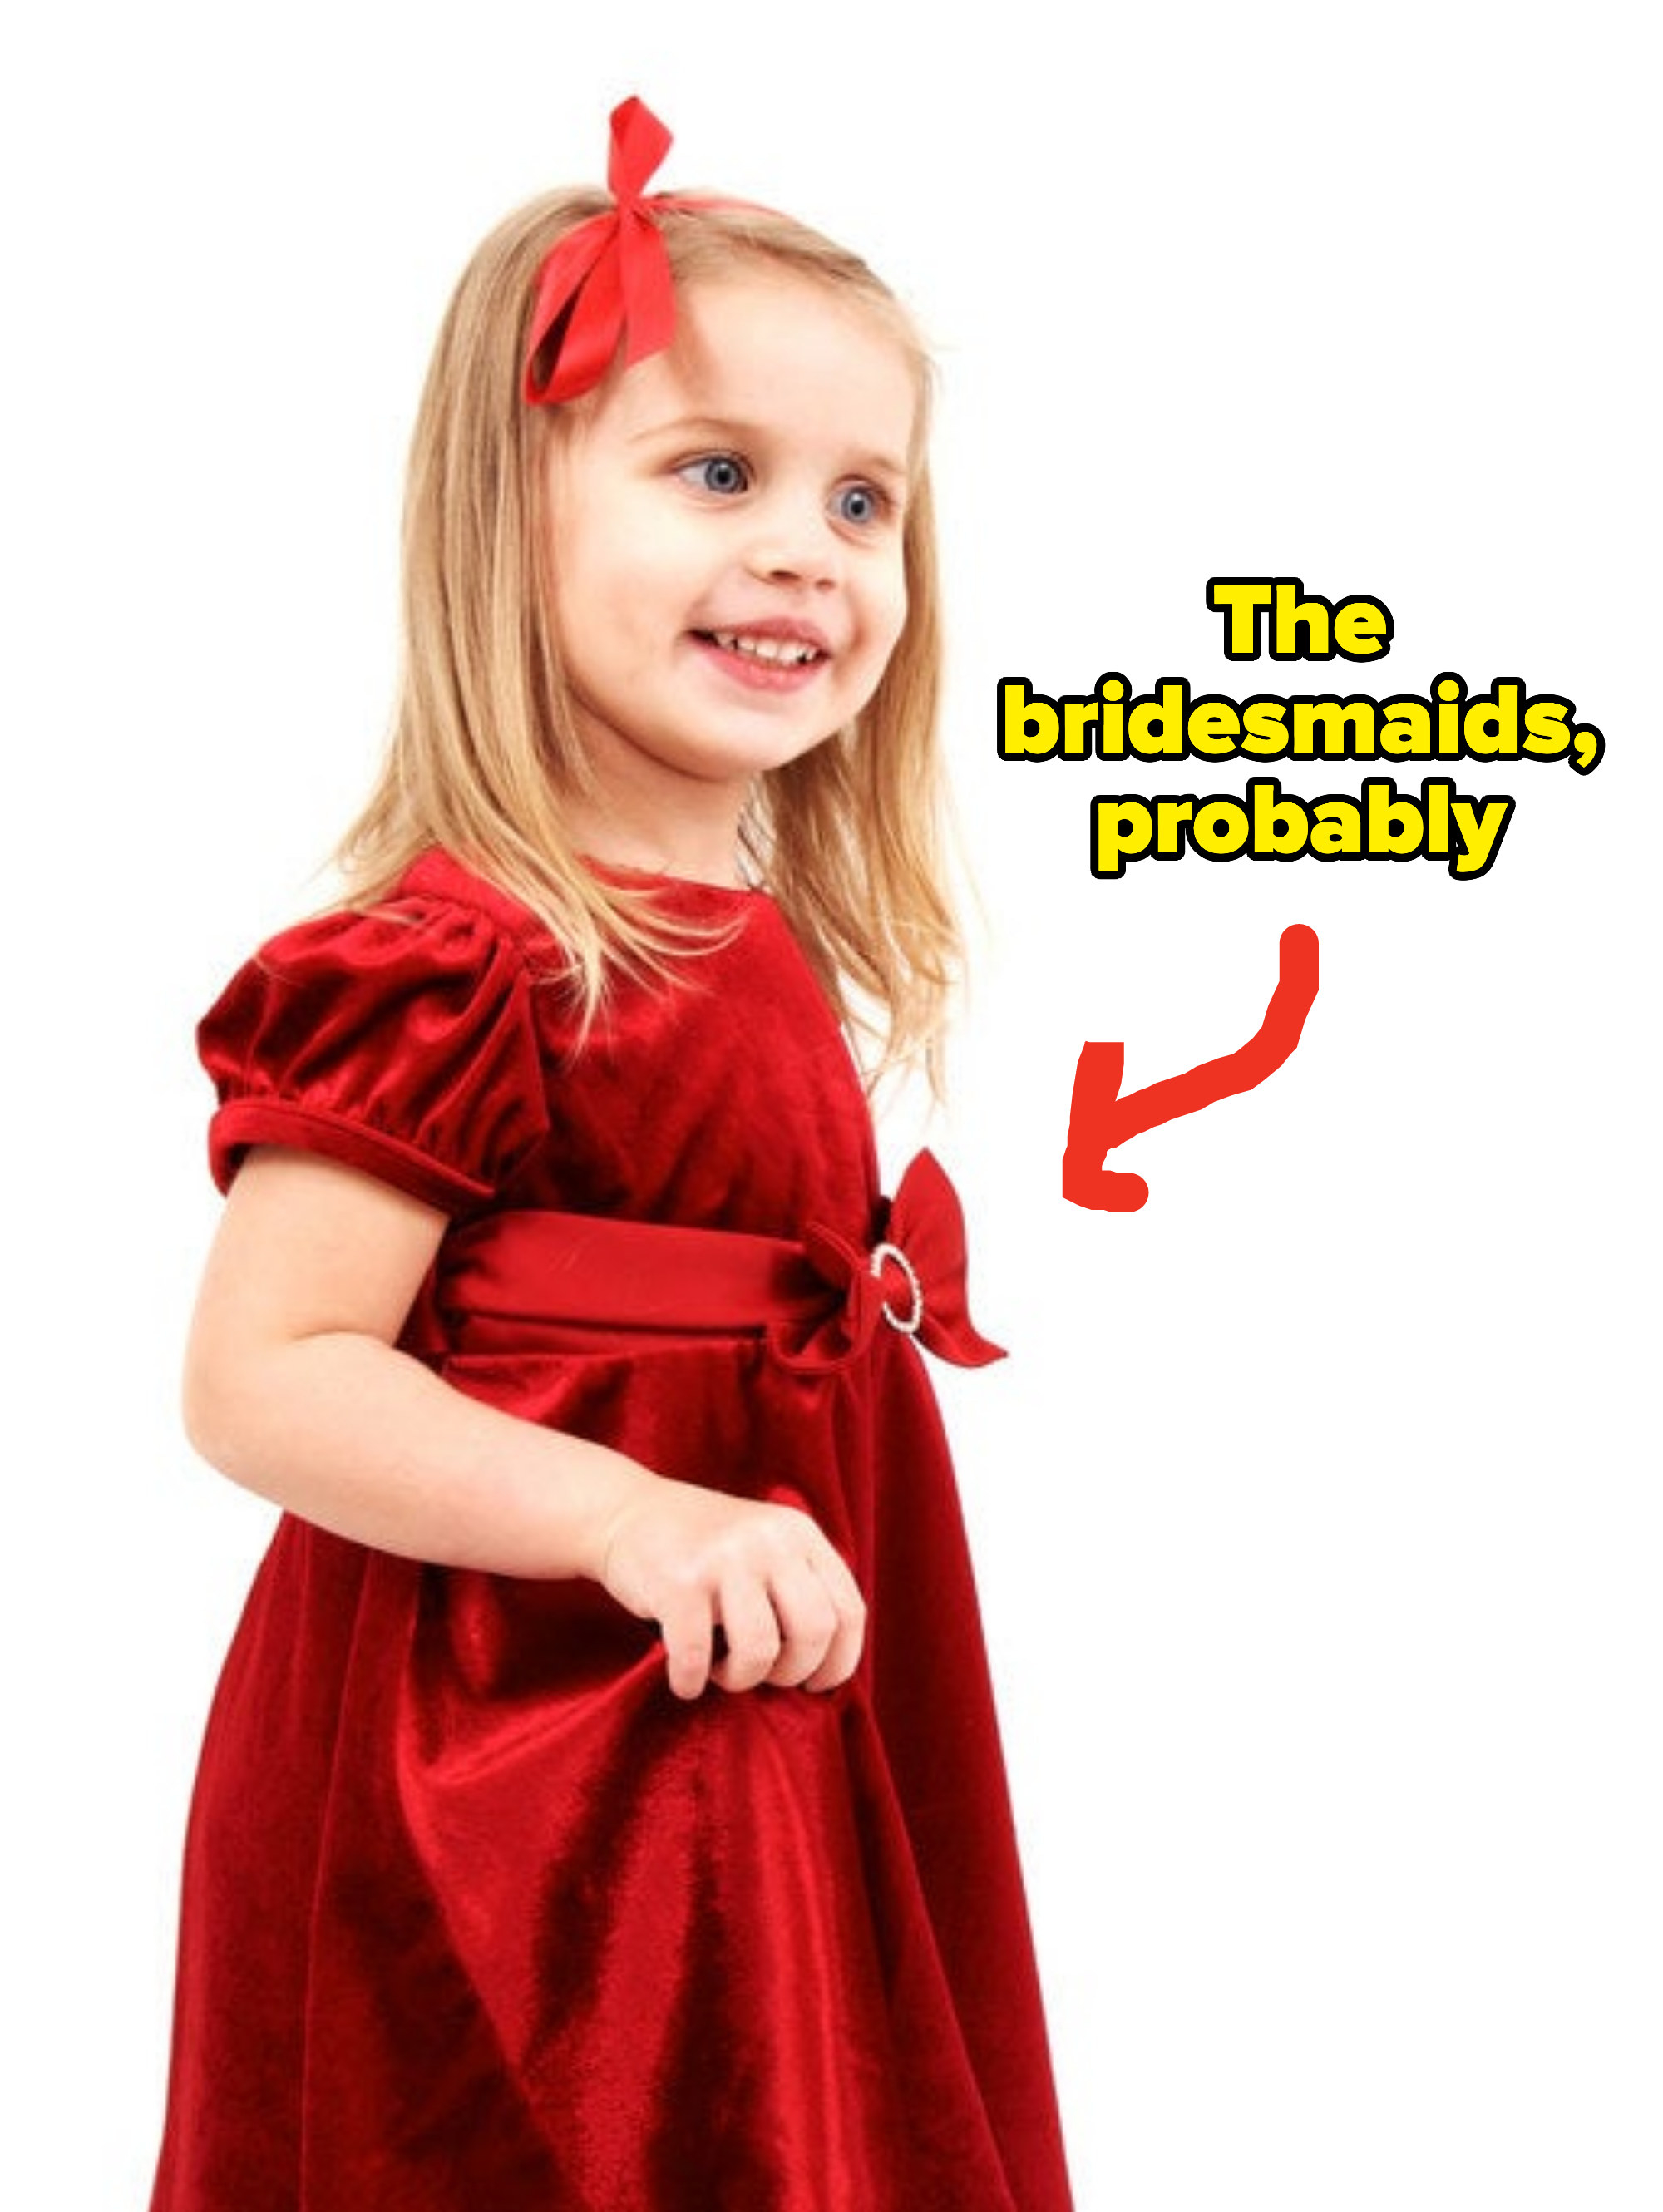 A little girl posing in a red dress, with the text &quot;the bridesmaids, probably&quot;